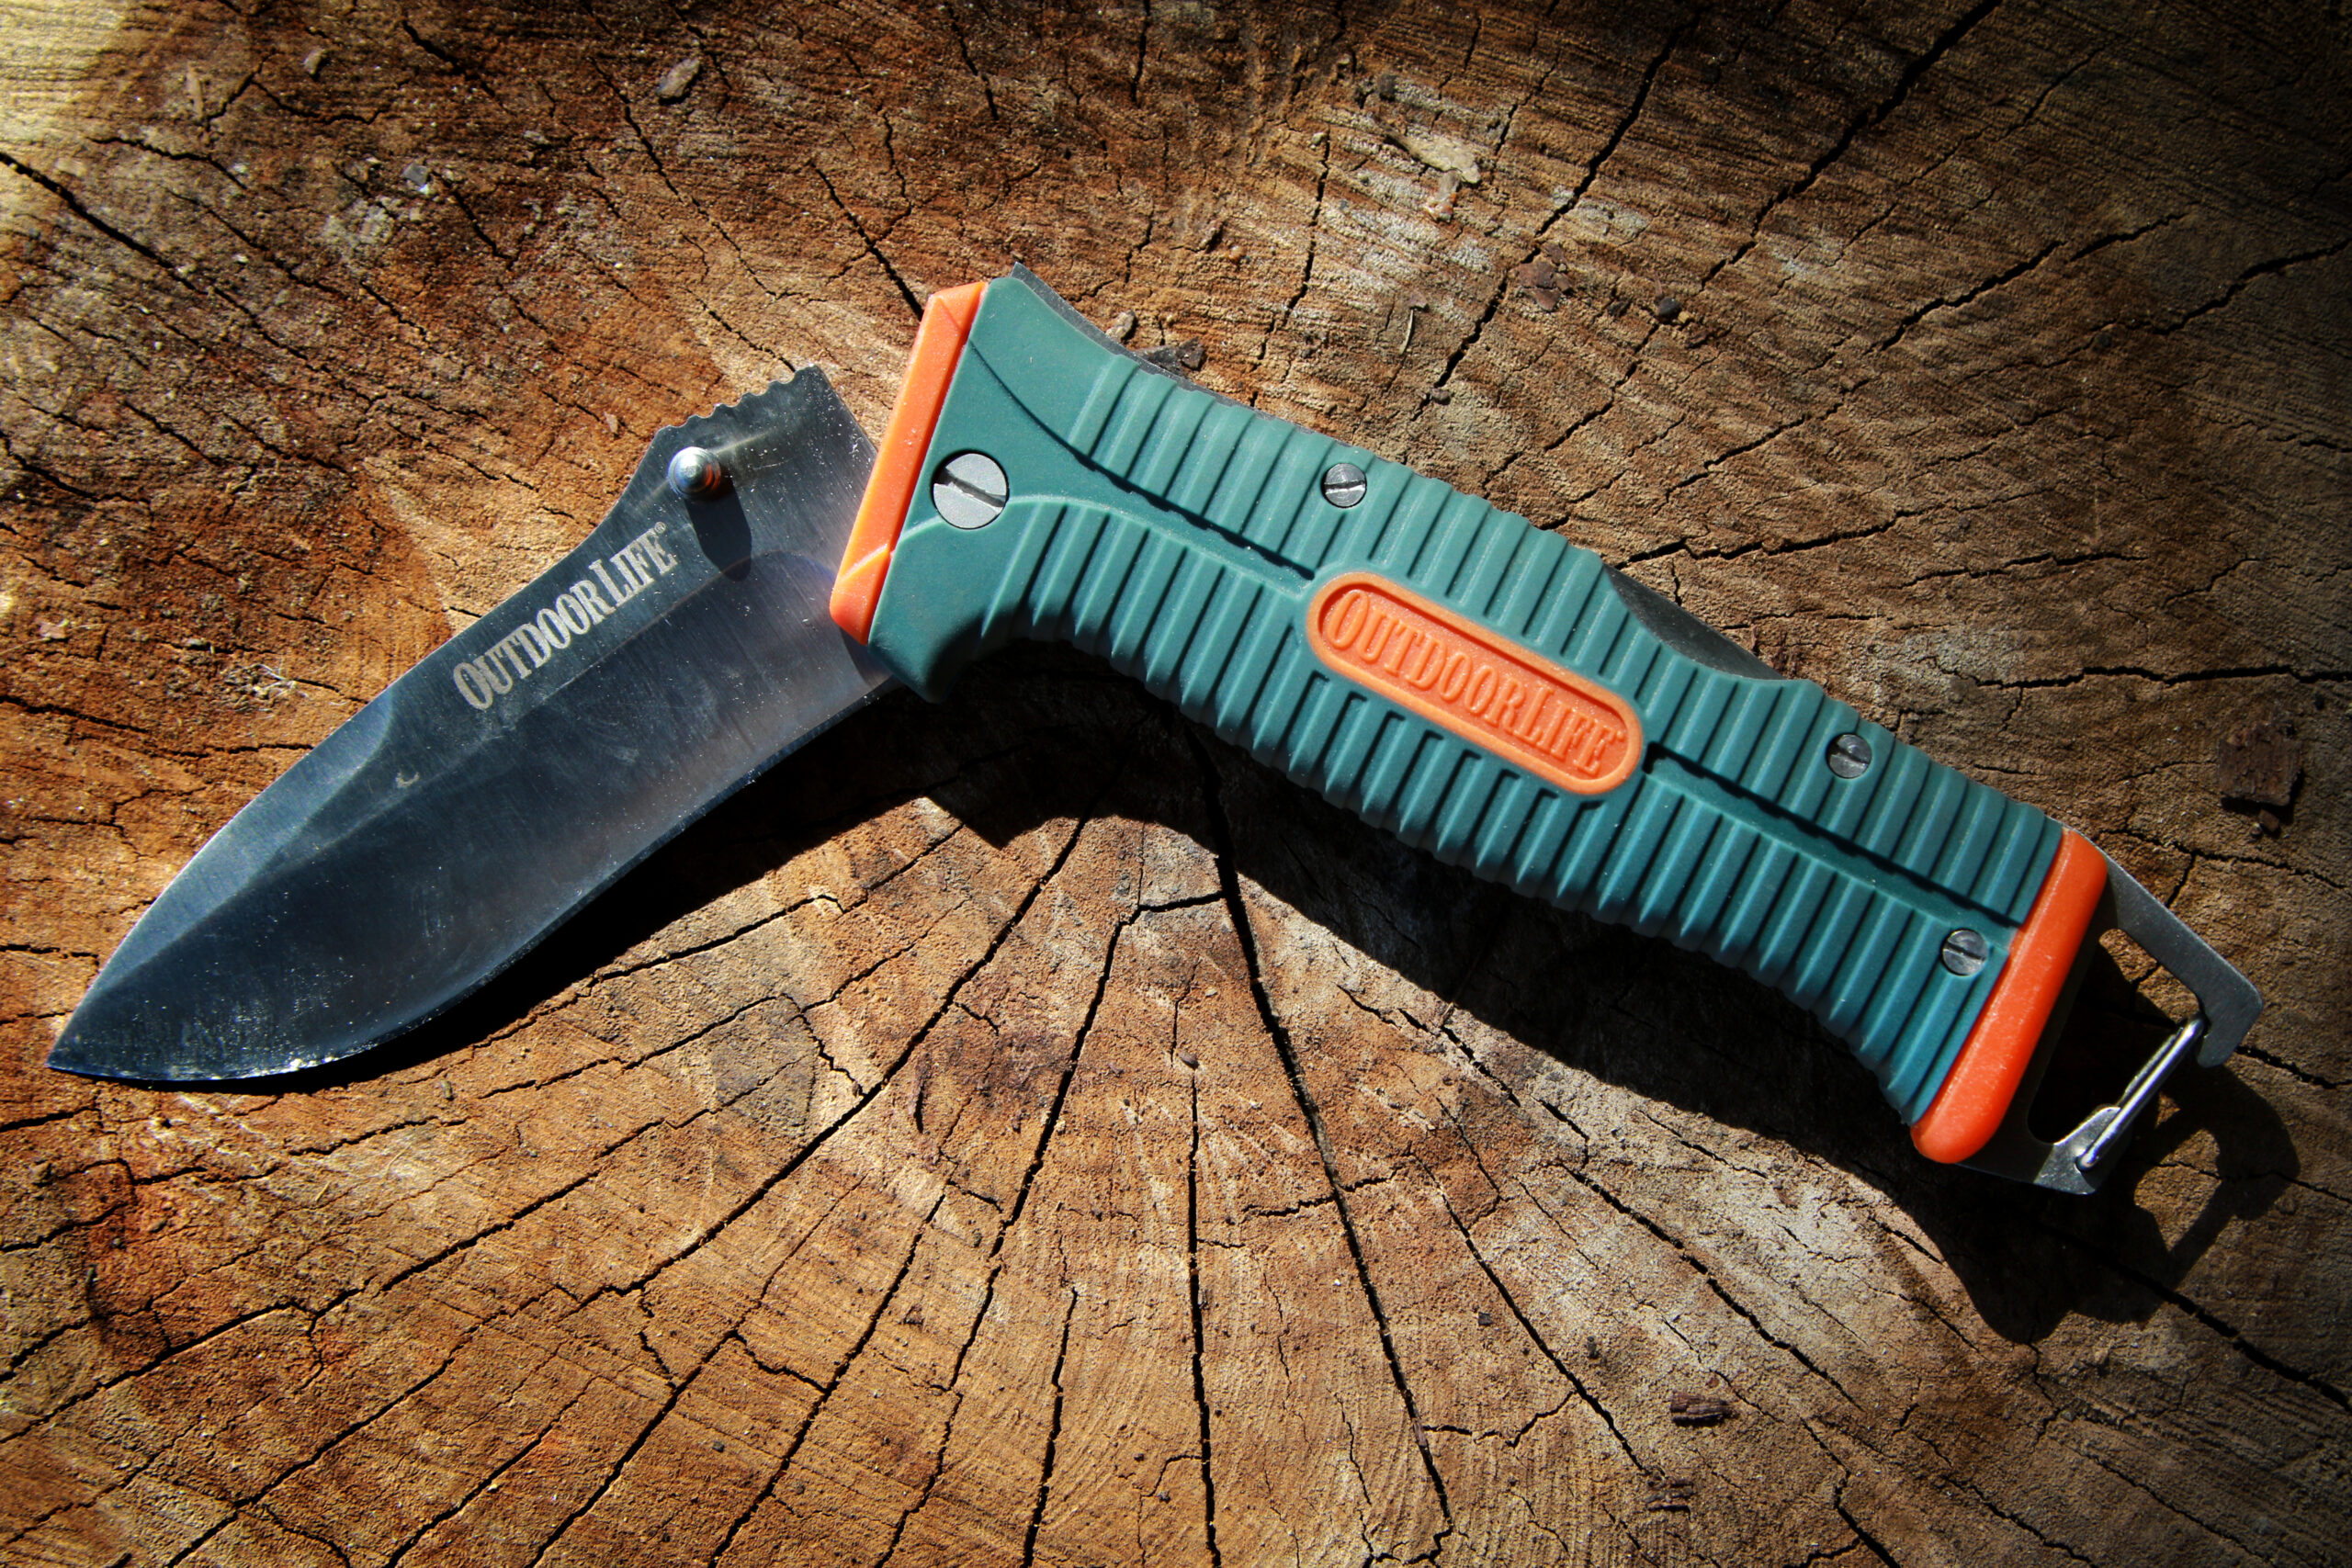 A partially unfolded camping folder knife, from Outdoor Life.